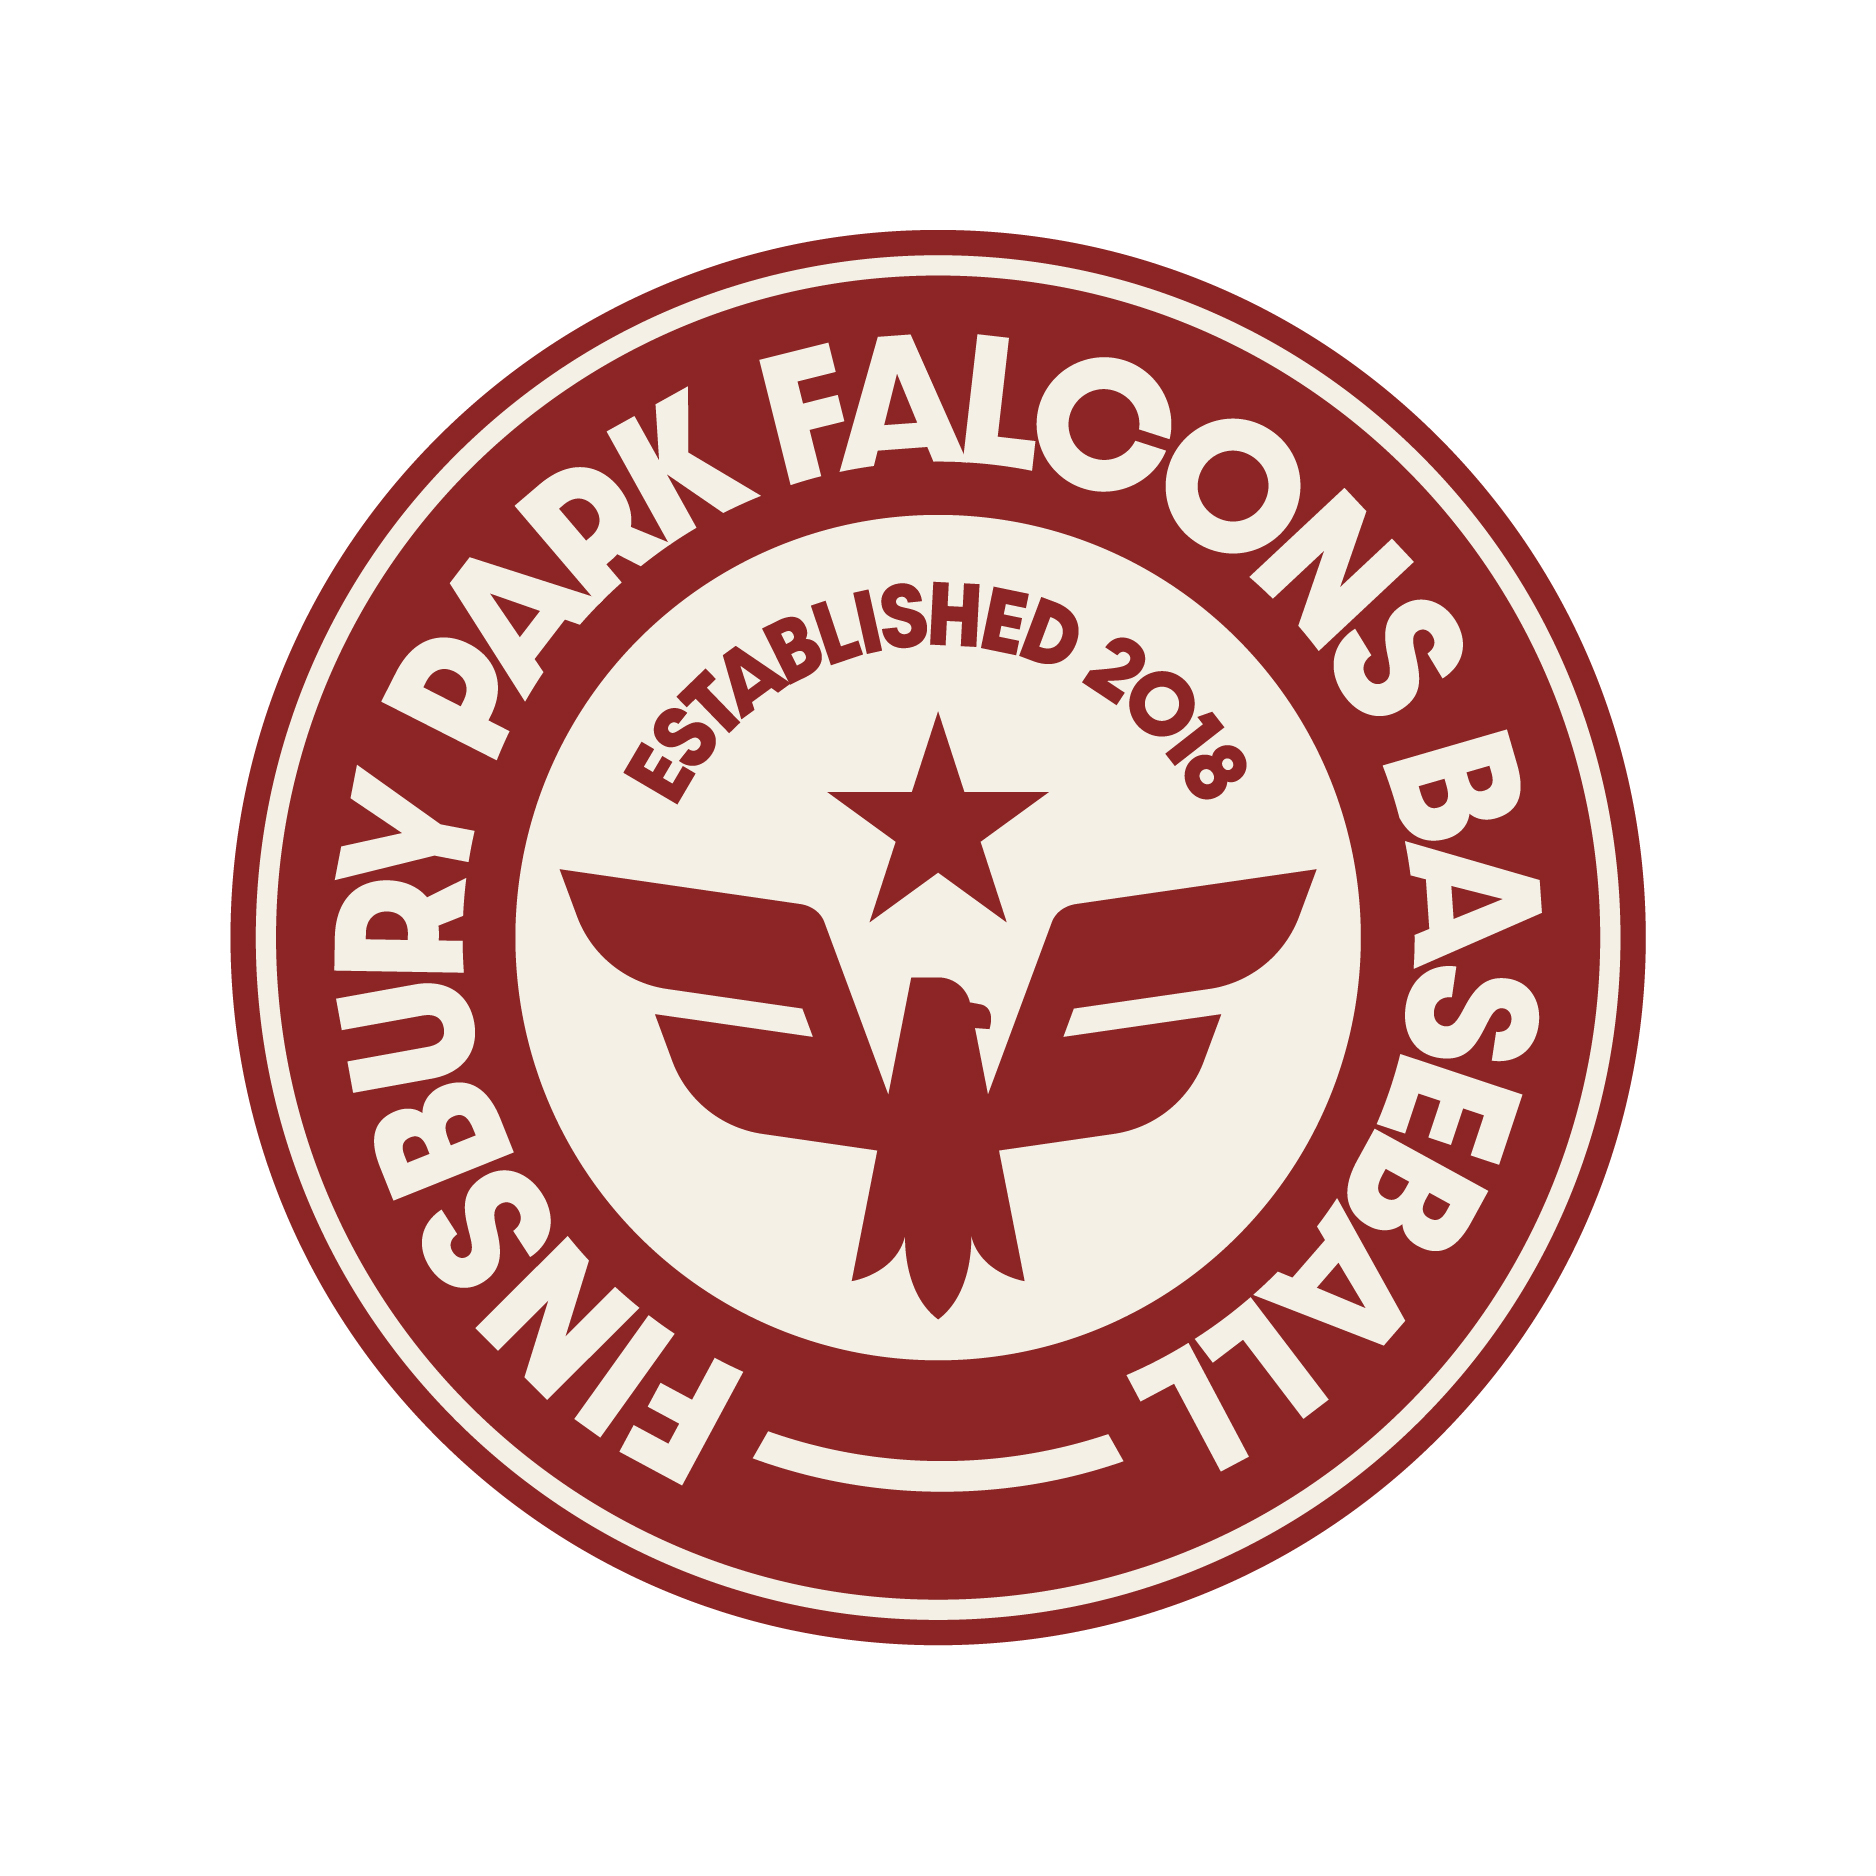 Finsbury+Park+Falcons+badge+design logo design by logo designer Chittco for your inspiration and for the worlds largest logo competition